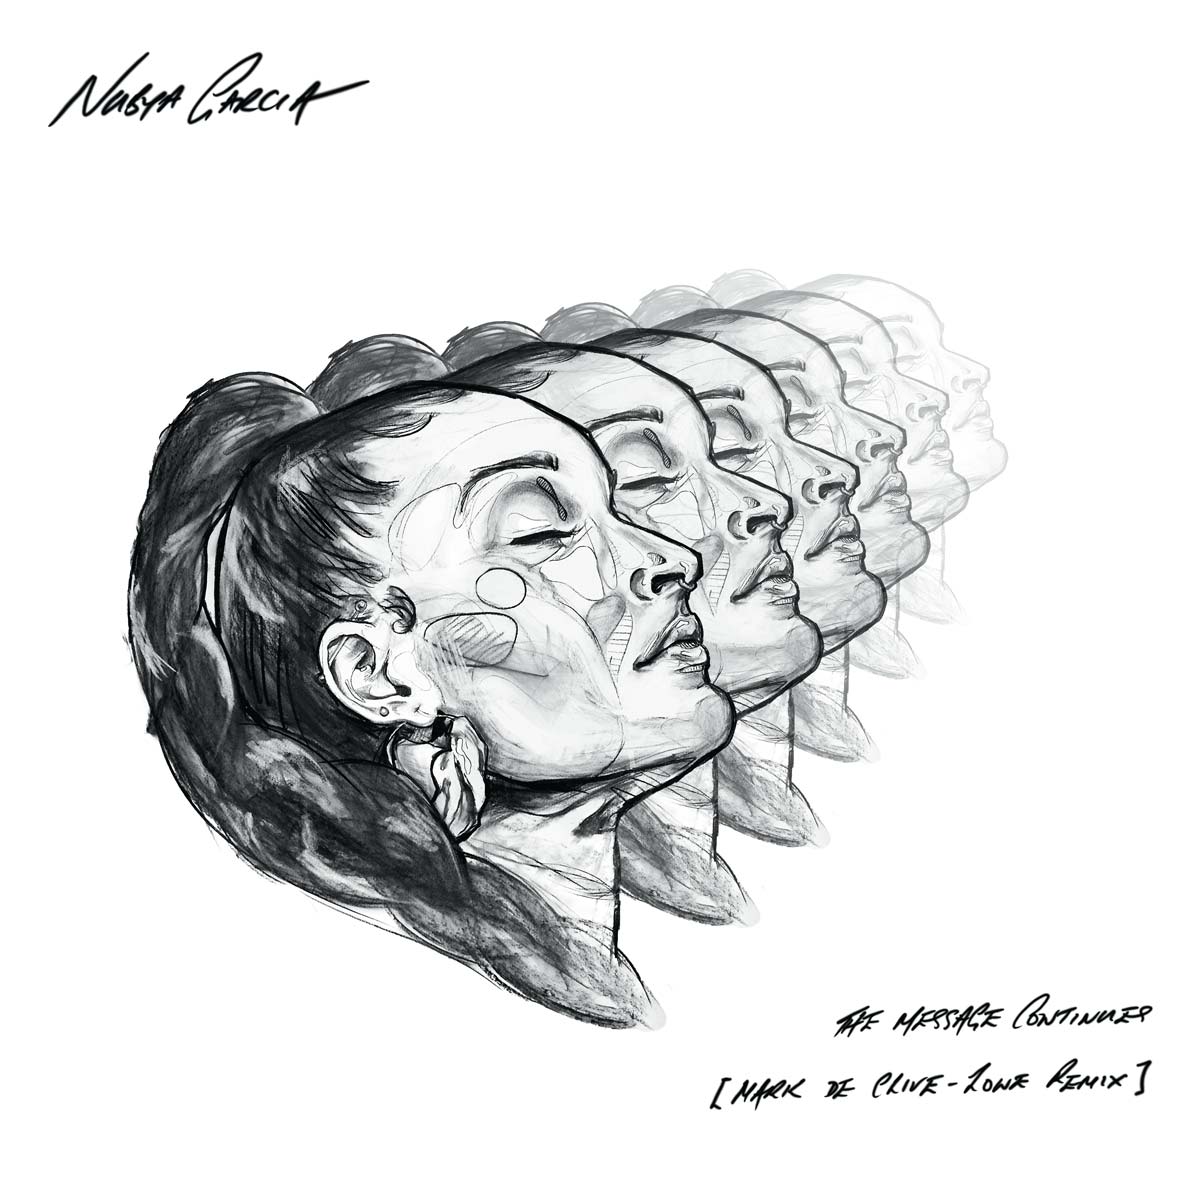 Featured image for “NUBYA GARCIA RELEASES LATEST SINGLE “THE MESSAGE CONTINUES (MARK DE CLIVE-LOWE REMIX)””